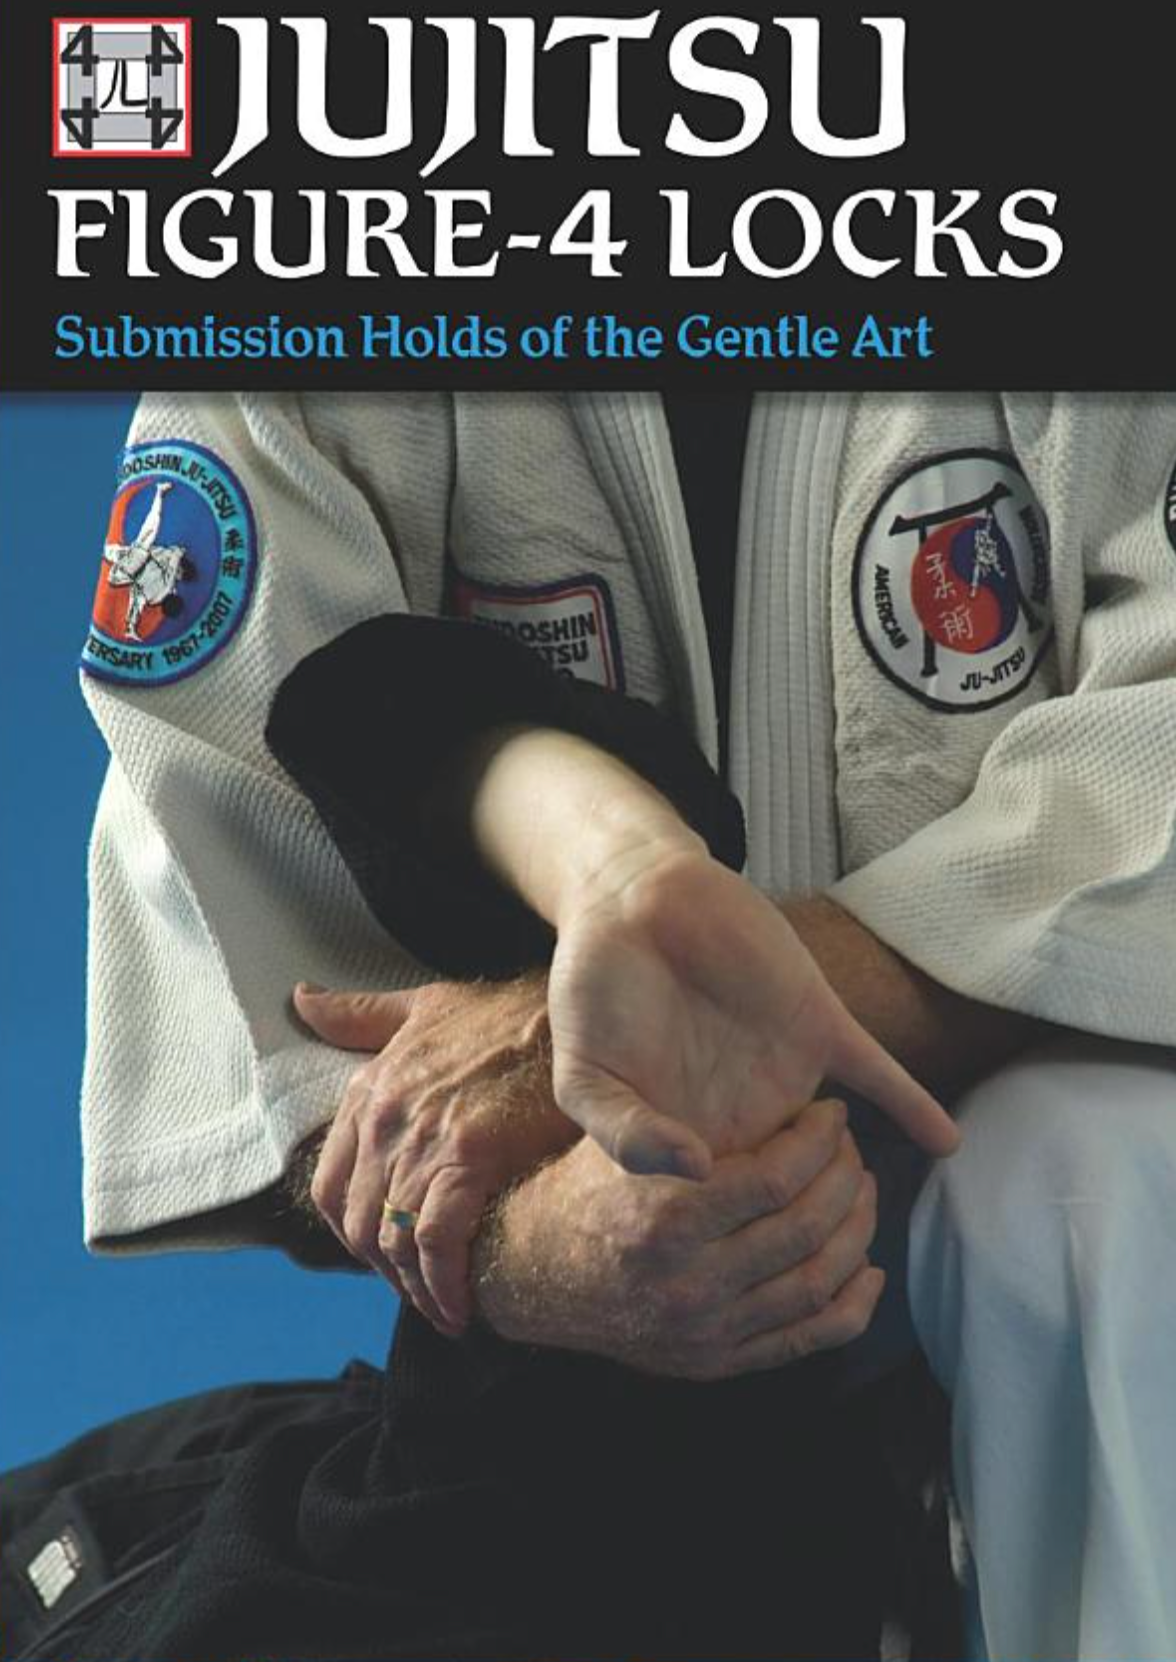 Jujitsu Figure-4 Locks: Submission Holds of the Gentle Art Book by George Kirby - Budovideos Inc